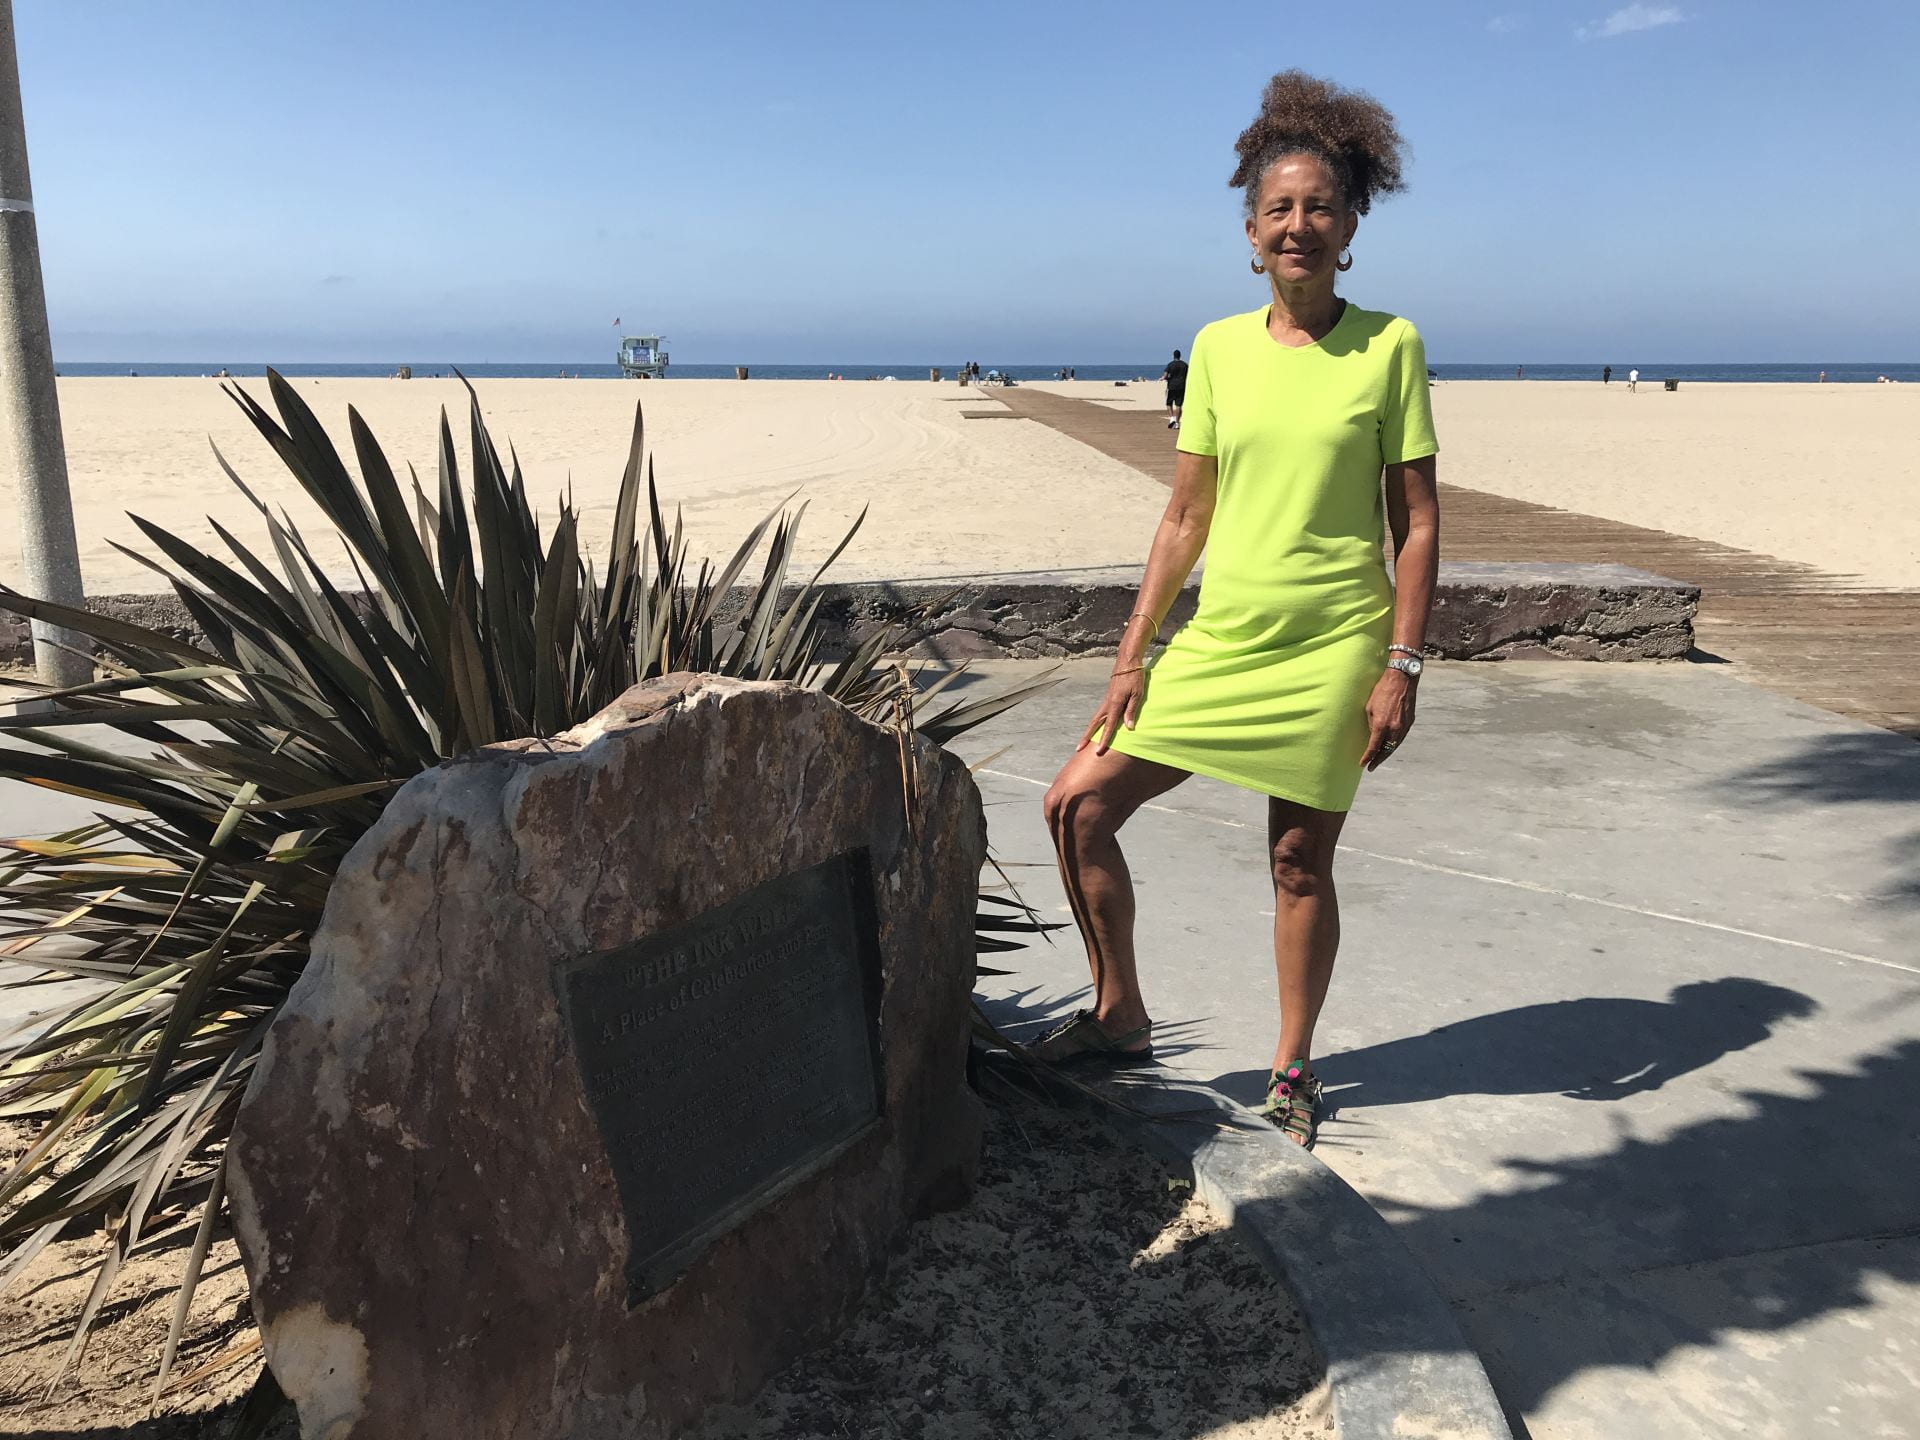 Alison Rose Jefferson next to the plaque commemorating Bay Street Beach, known derisively as "the Inkwell." The plaque is embedded into a large rock near the beach in Santa Monica.